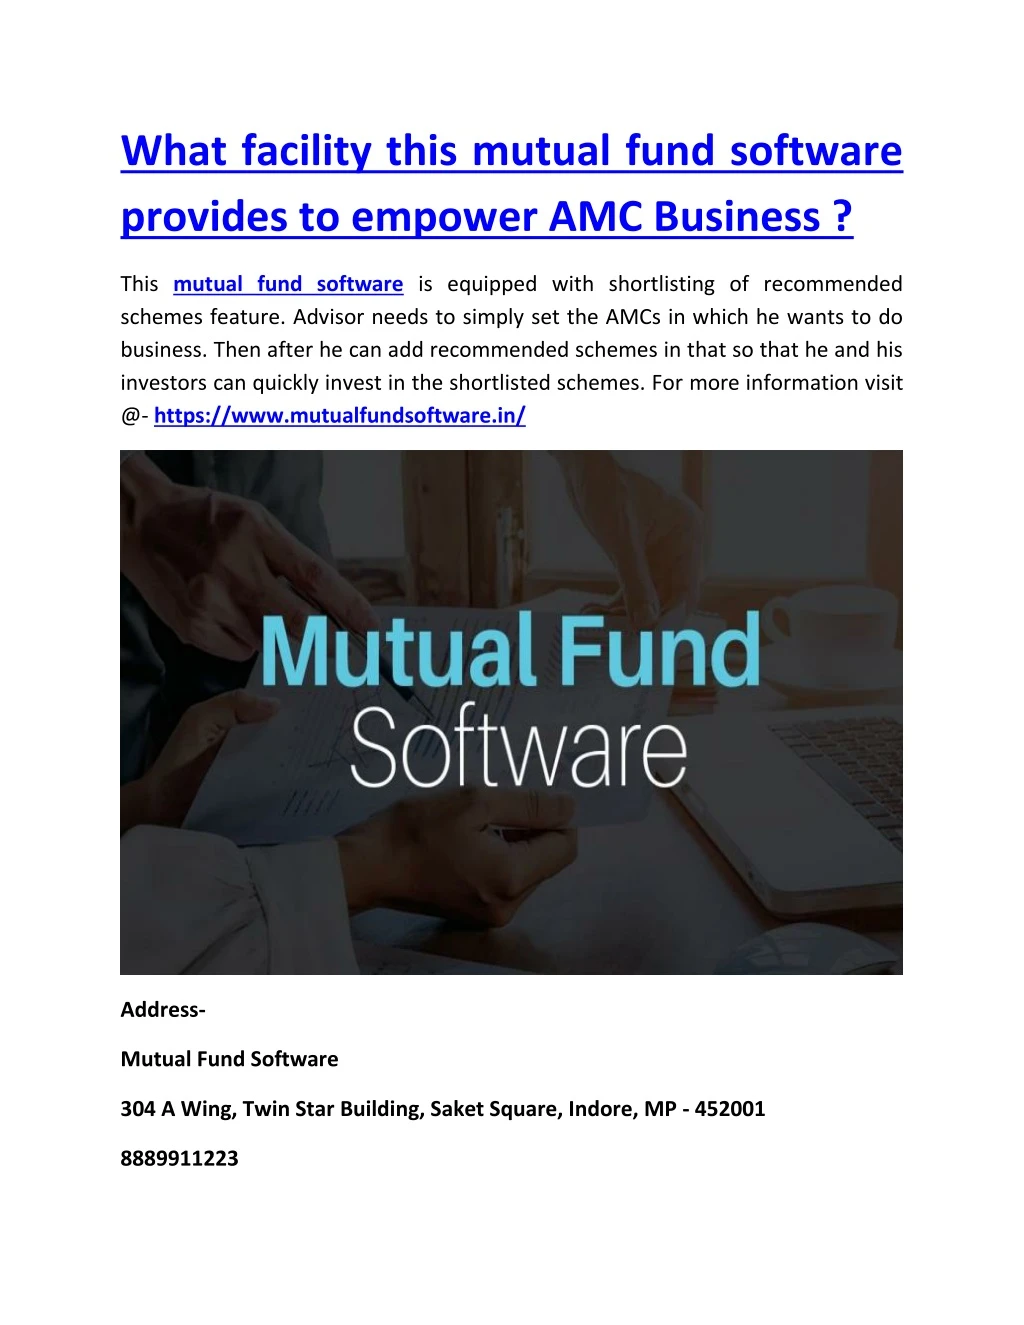 what facility this mutual fund software provides